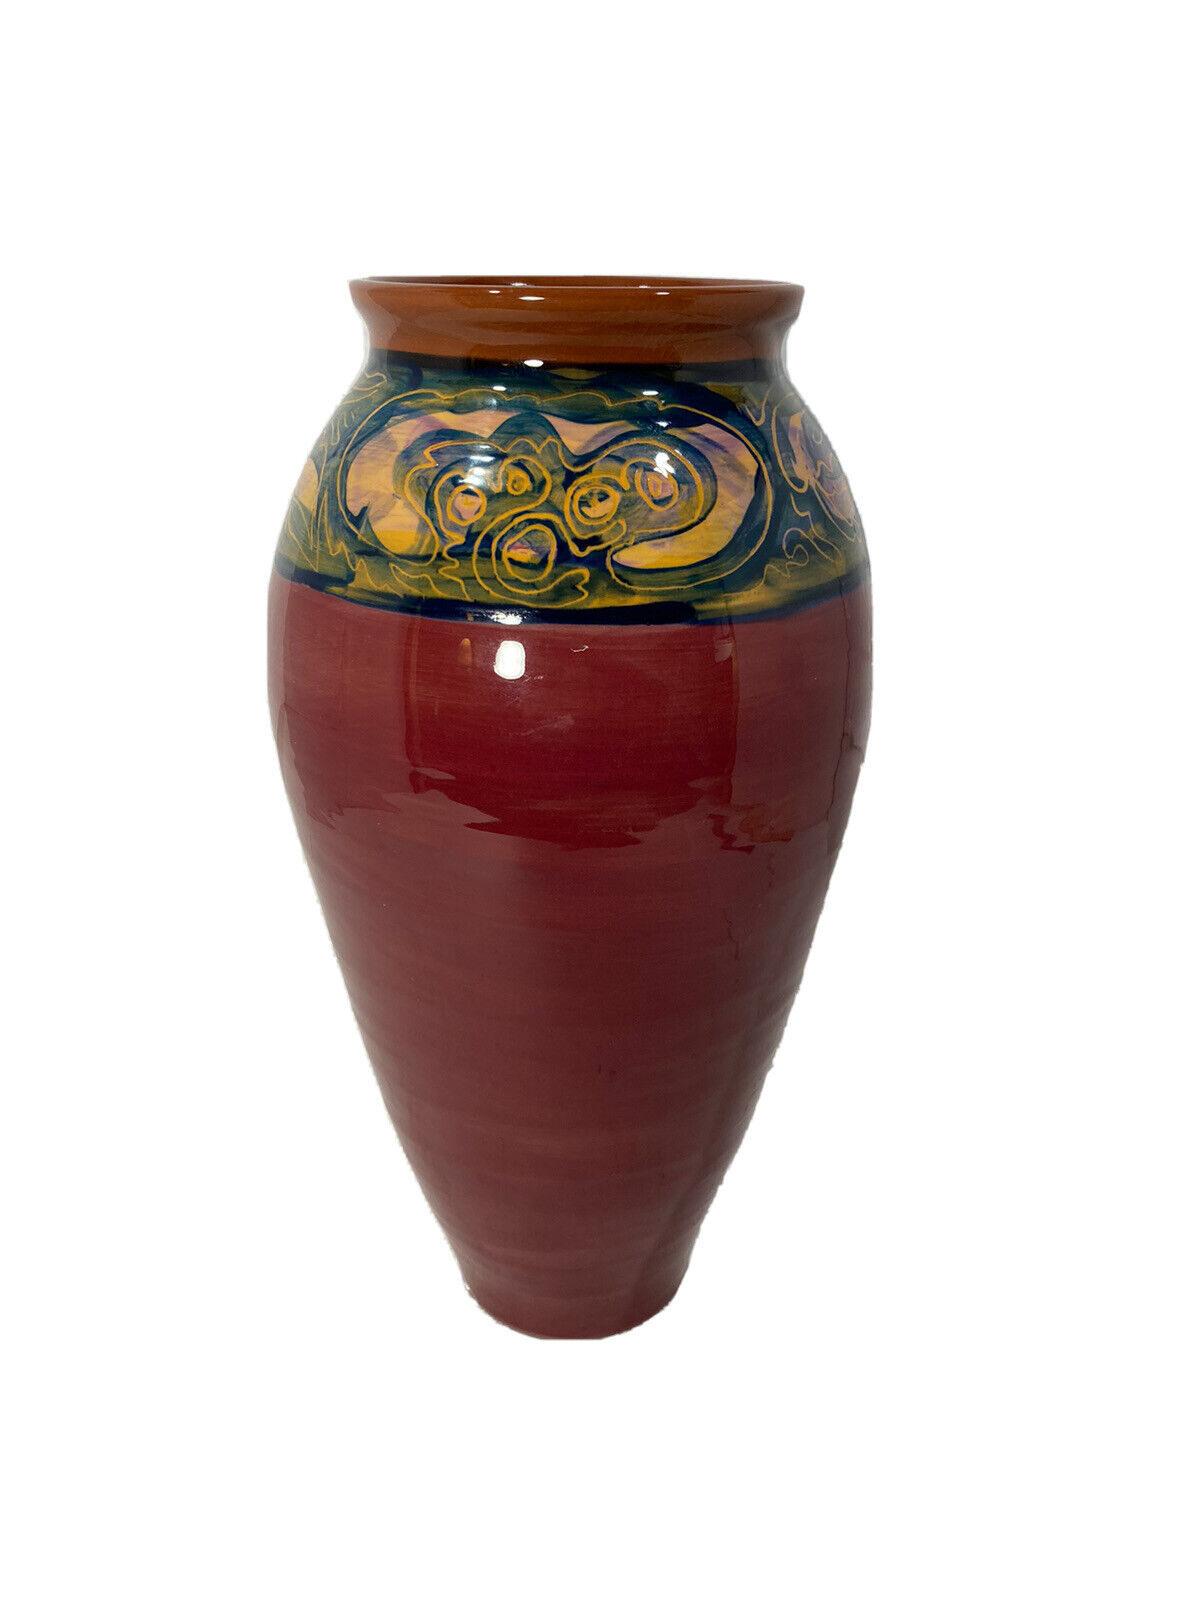 Vintage Artisan Made 12” Vase-Oxblood Red with Marbled Accents-Signed HWP